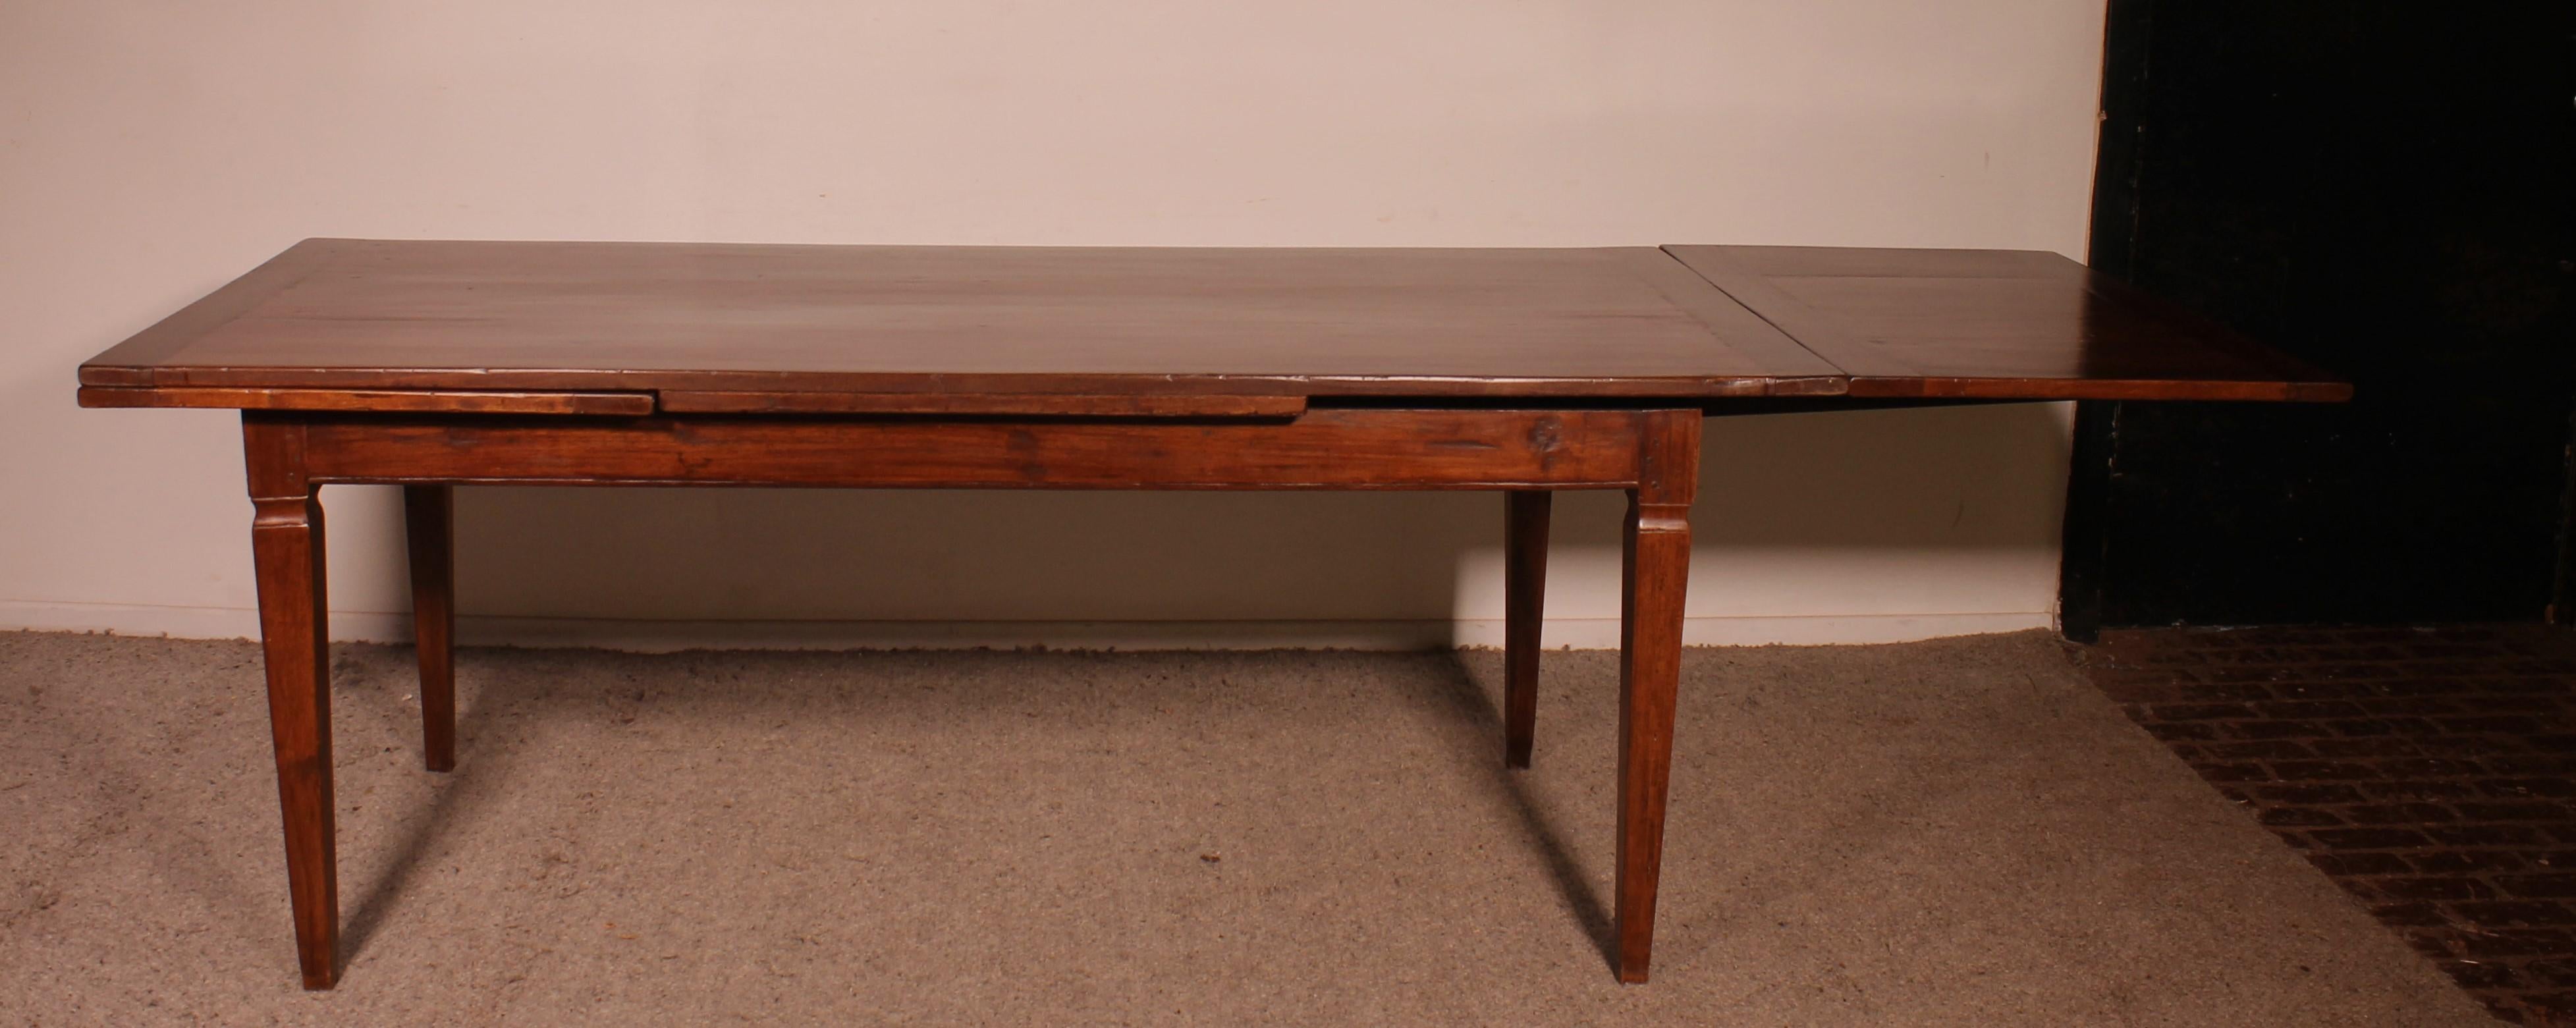 Dutch Refectory Table From The 19th Century For Sale 3